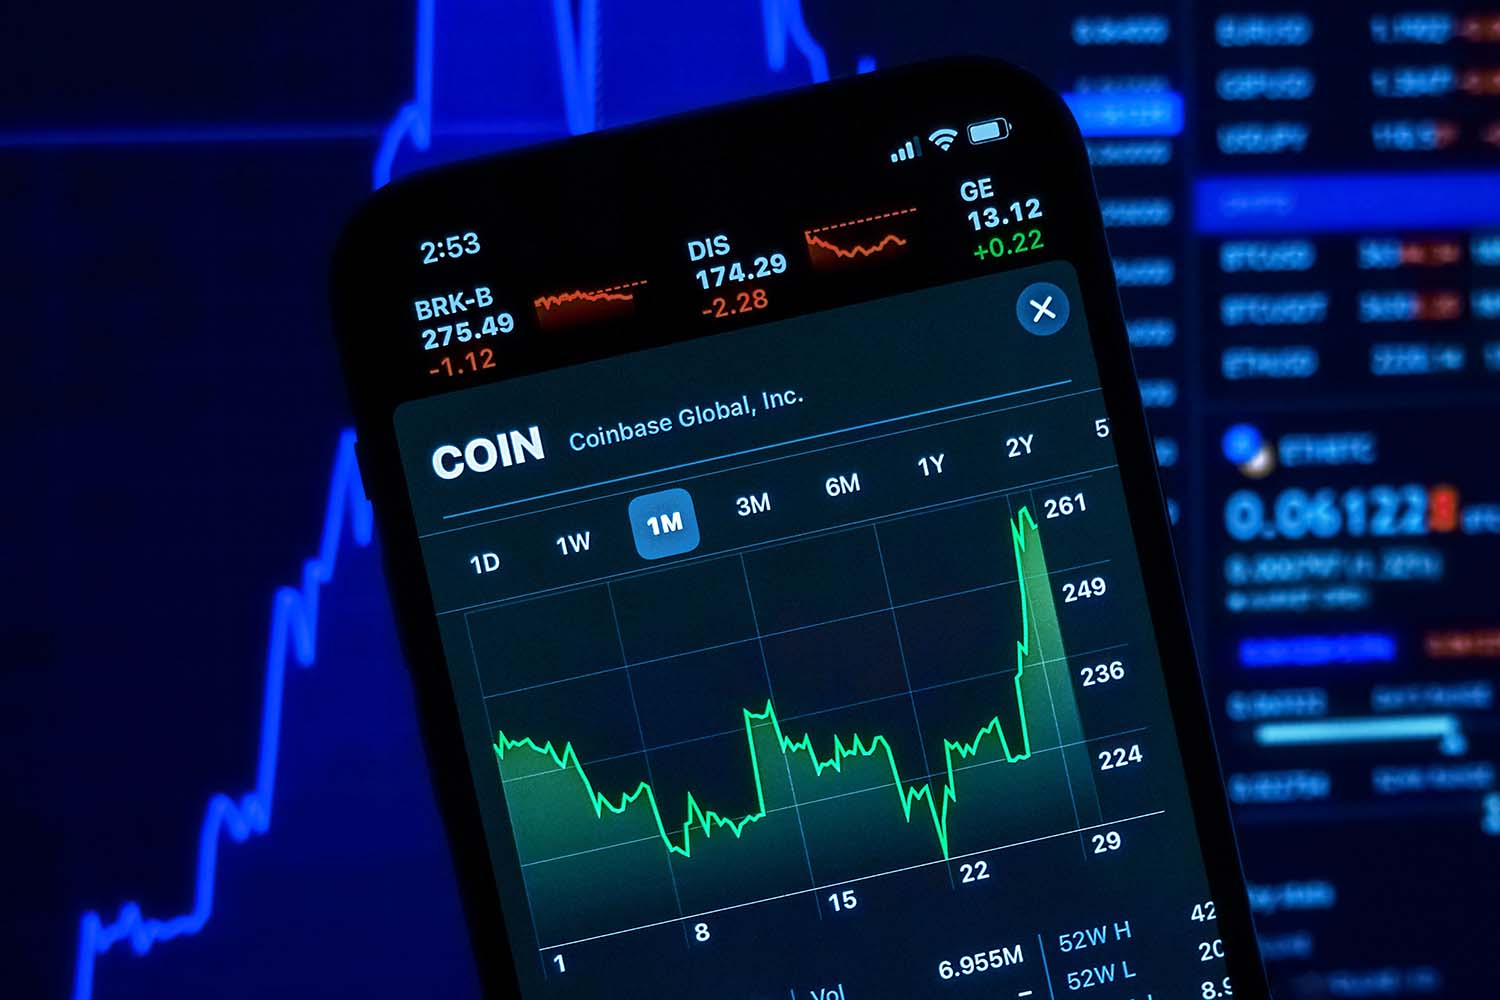 the best decentralized crypto exchange